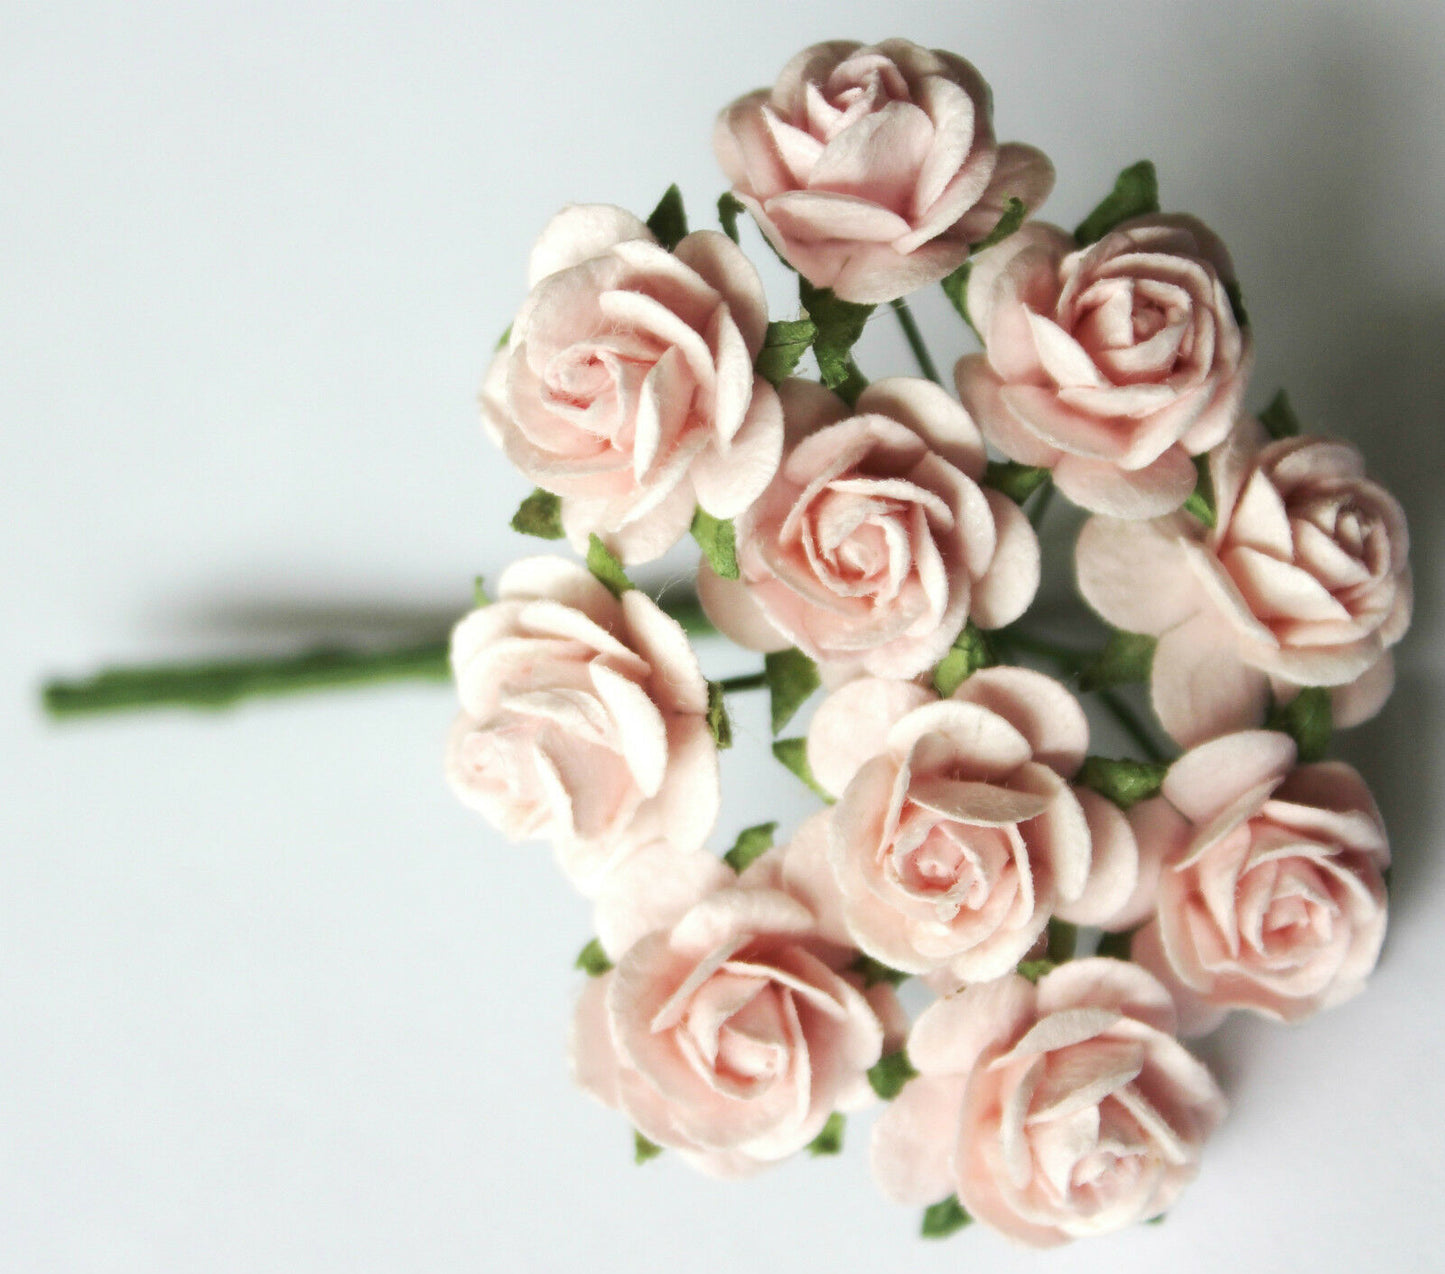 15mm Mulberry Paper Rose Flowers With Wire Stems For Card Making Craft